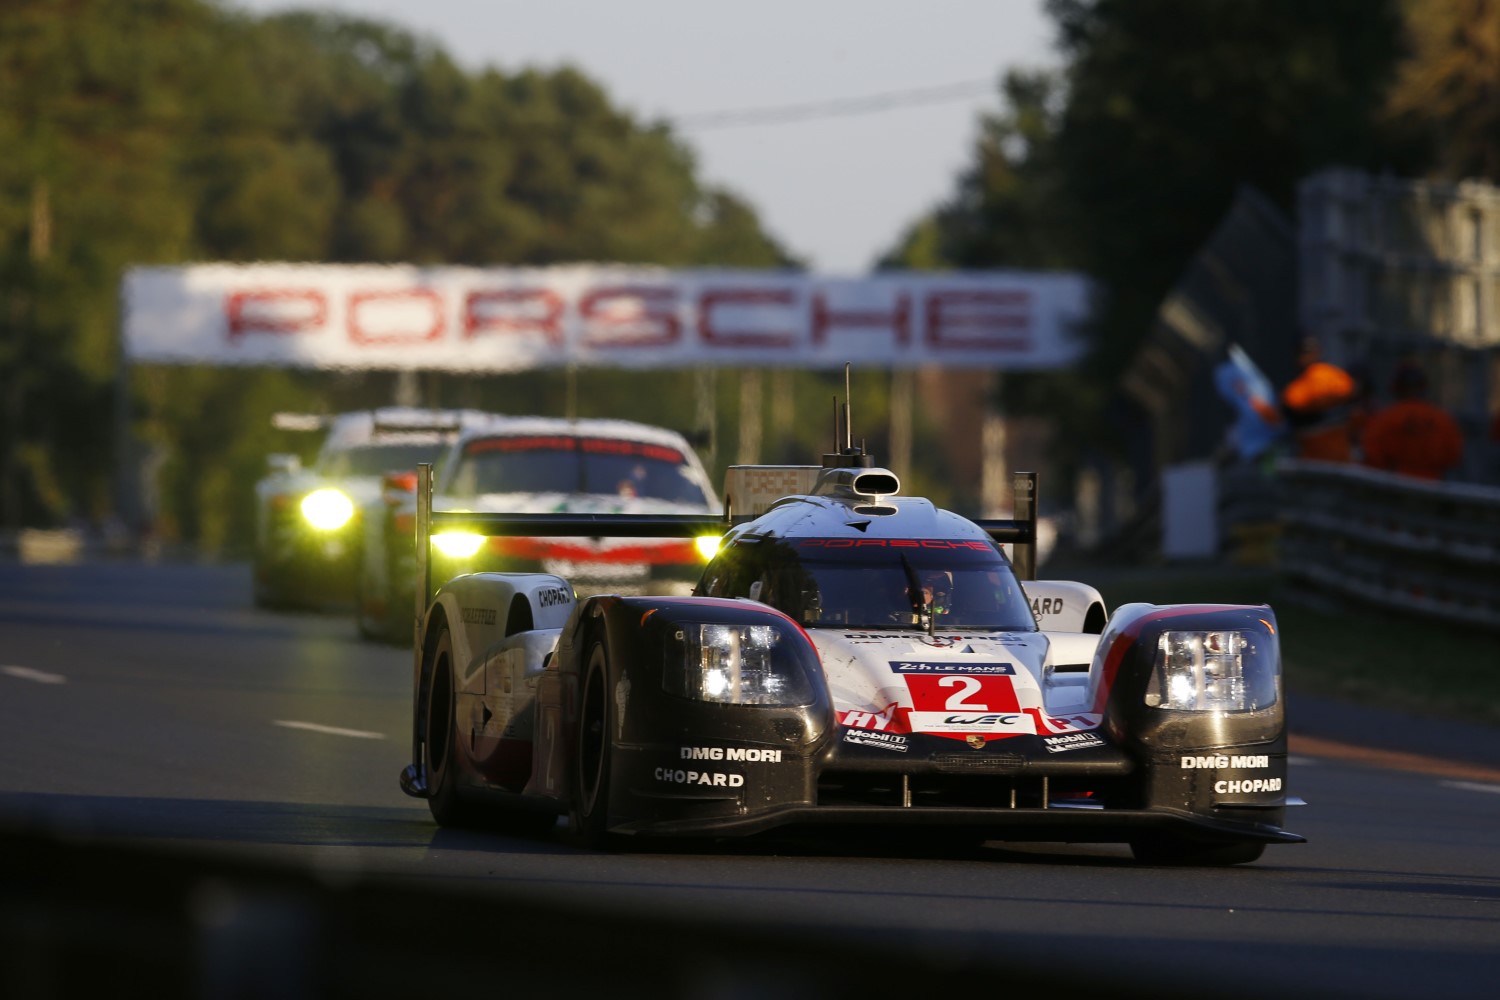 The winning #2 Porsche at LeMans gets more downforce for Nurburgring